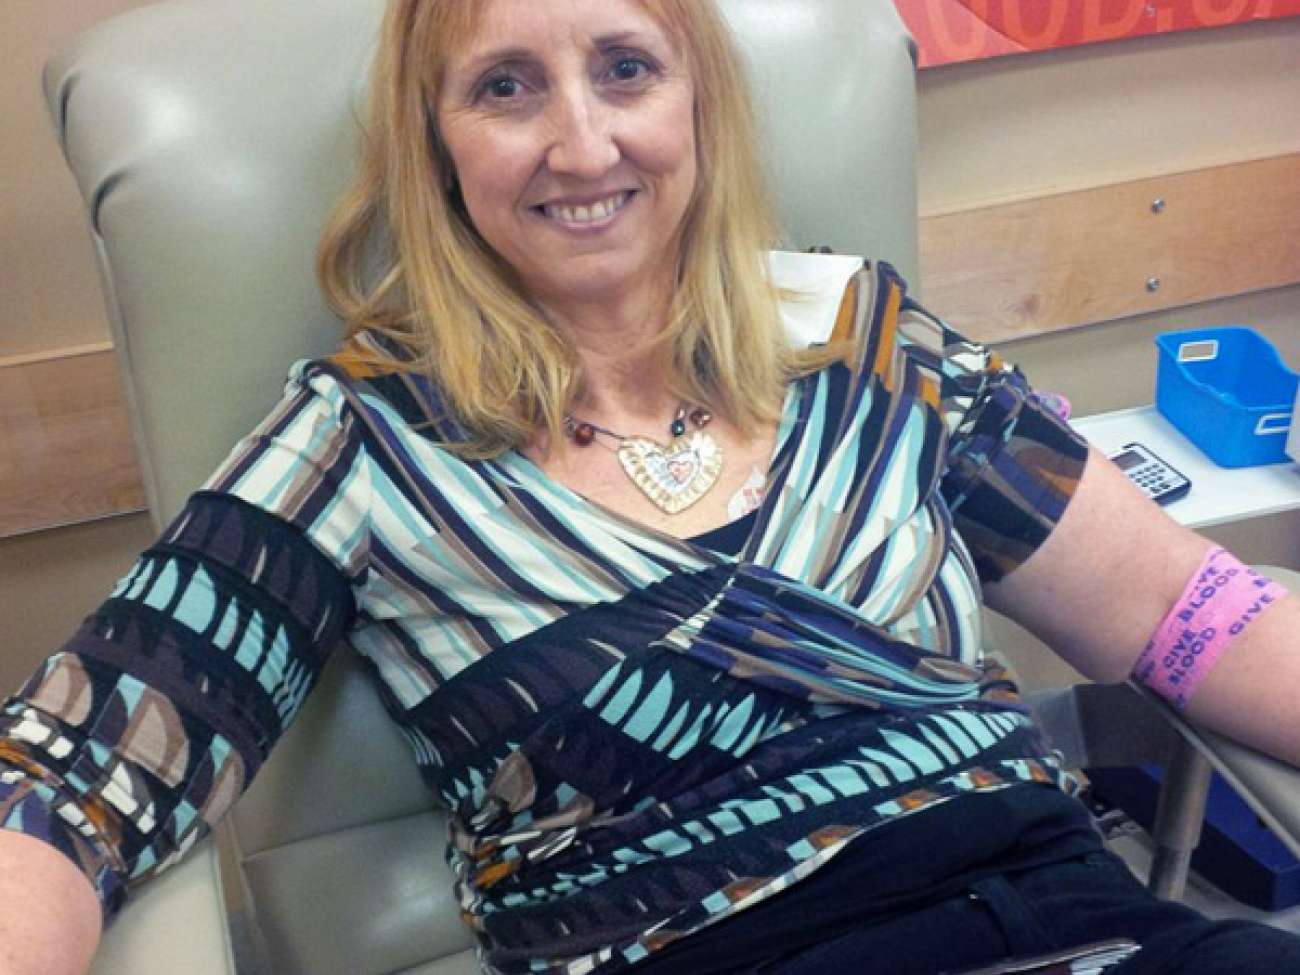 Cathy from childbirth relaxes after her donation.